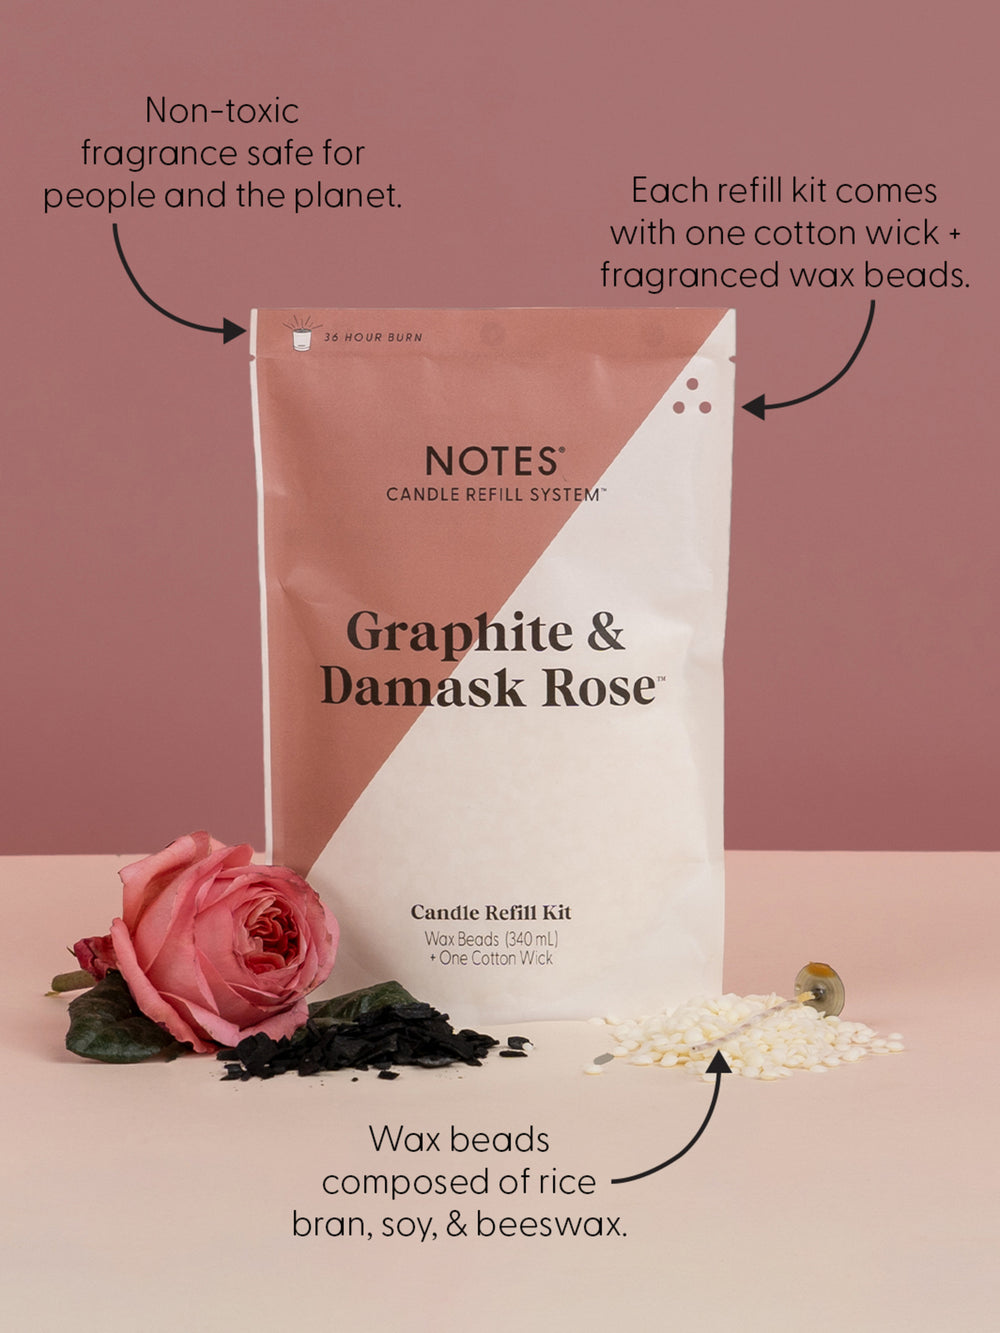 Sustainable Candle Refill Kit - NOTES Graphite & Damask Rose